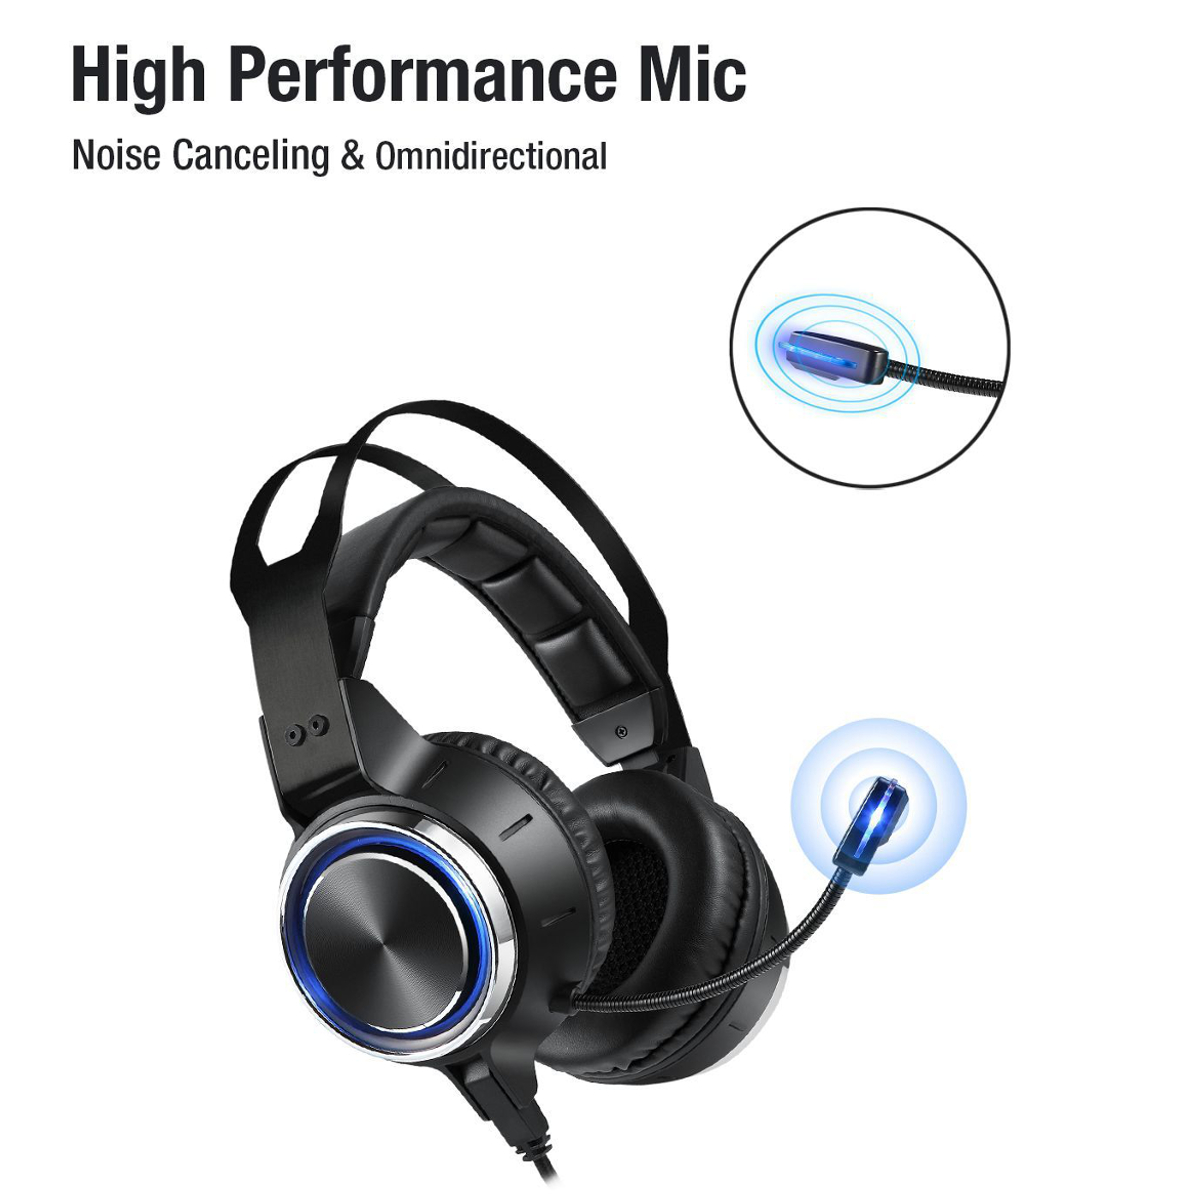 Bakeey Wired Stereo Bass Surround Noise Reduction Gaming Headset with Mic for PS4 New for Xbox One PC